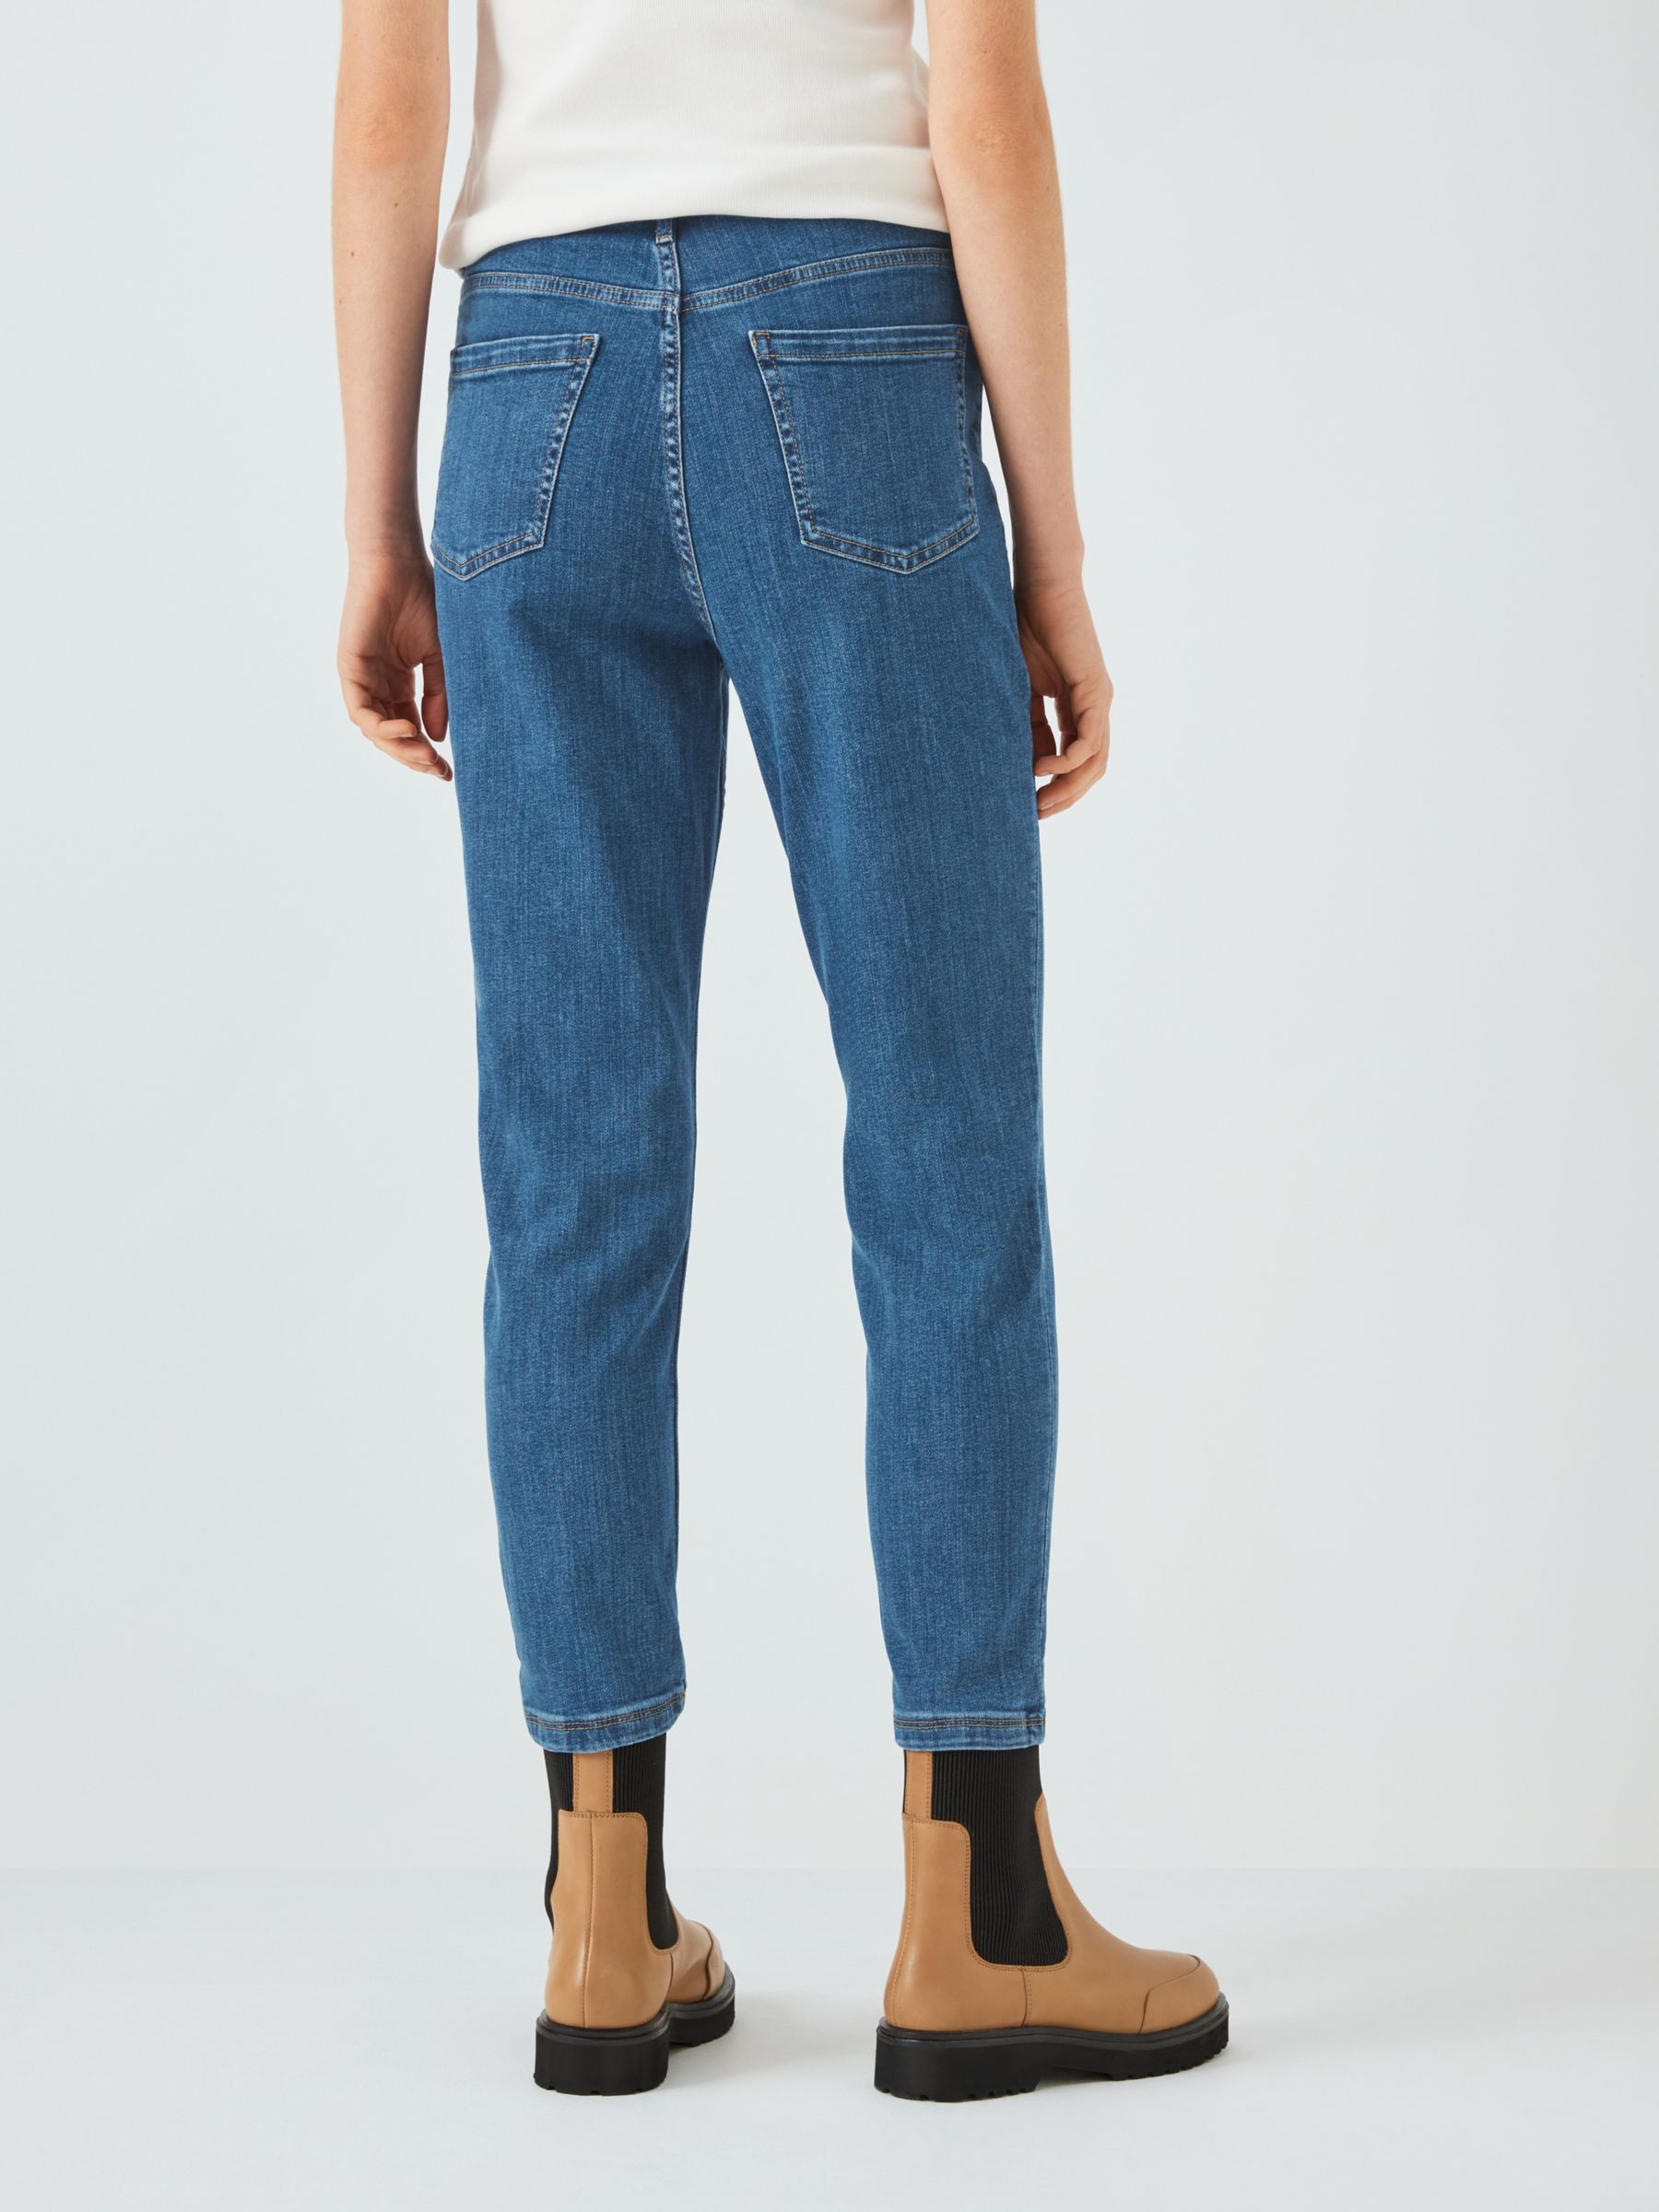 John Lewis ANYDAY Hoxton Mom Jeans, Mid Wash, 6